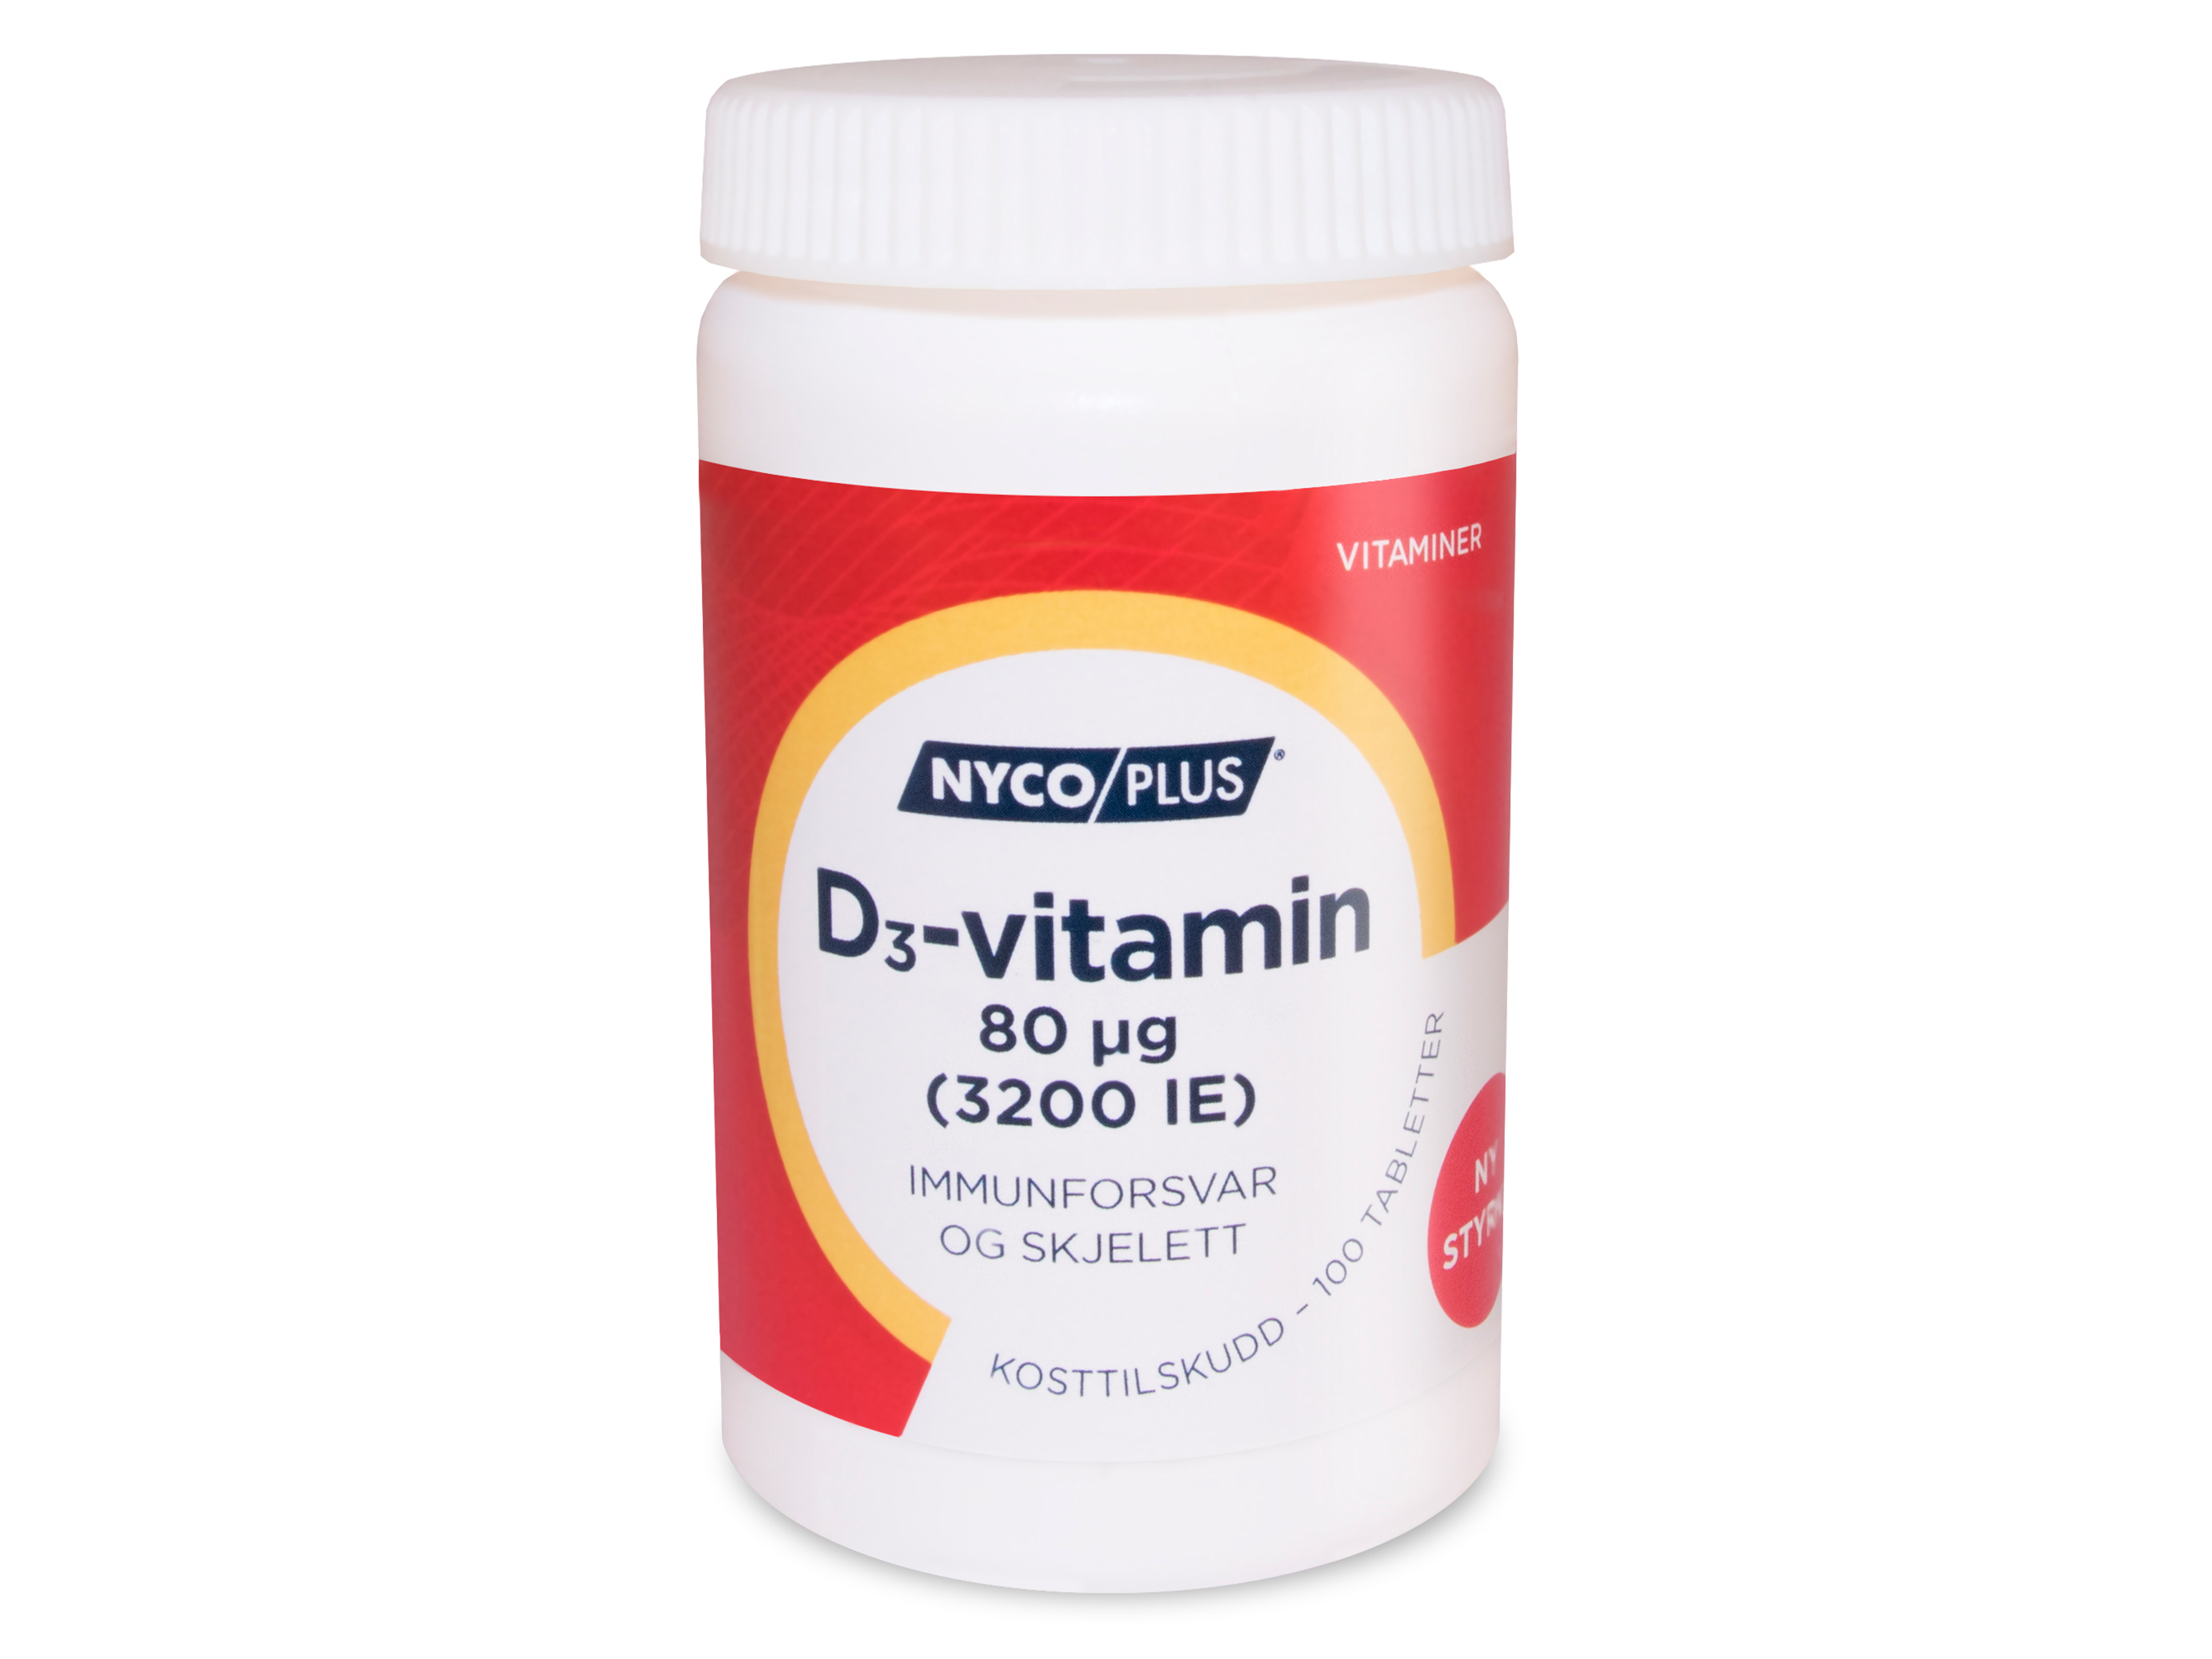 Nycoplus D3-Vitamin 80 µg, 100 tabletter